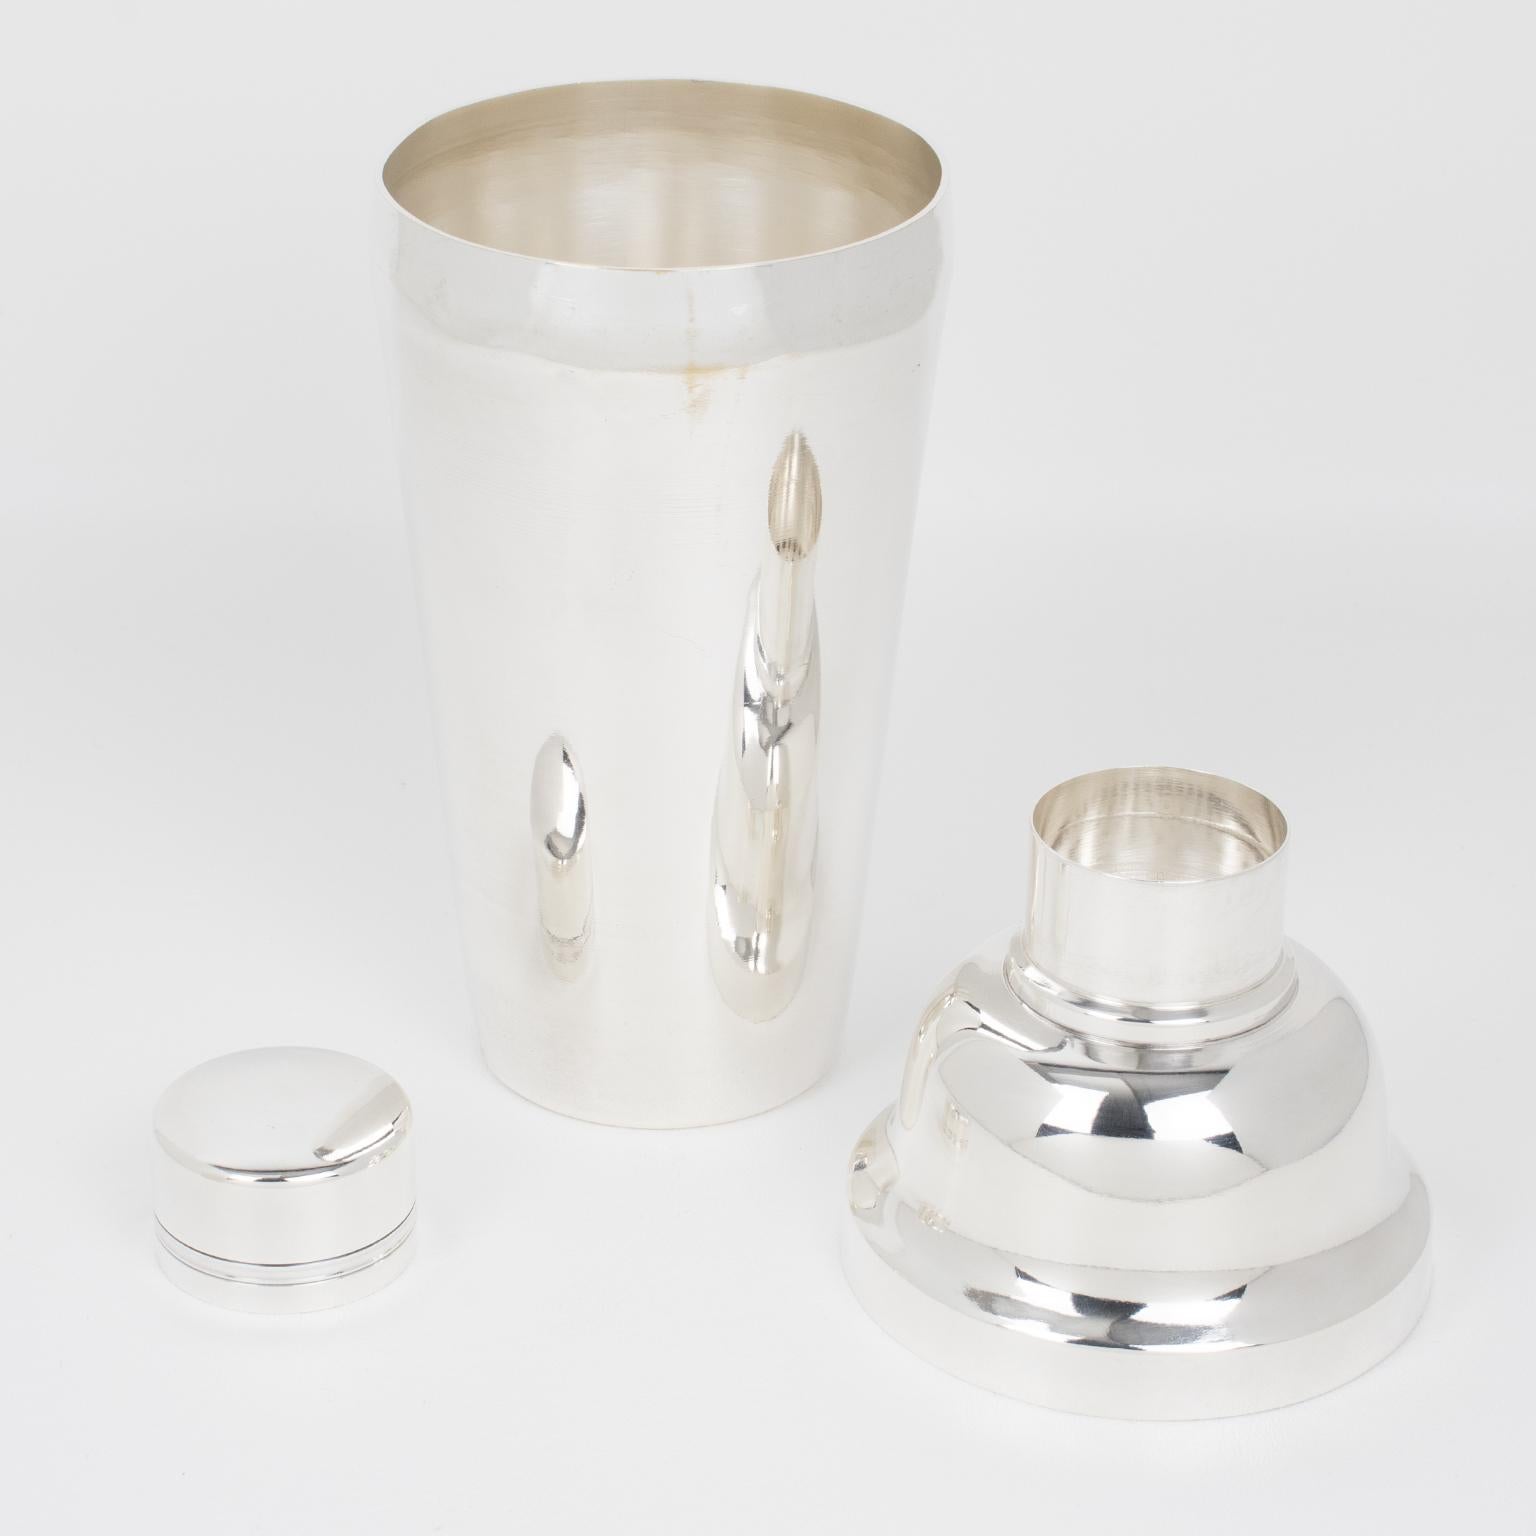 French silversmith Ets Boyer et Fils, Paris, crafted this elegant Art Deco silver plate cylindrical cocktail or Martini Shaker in the 1940s. The three-sectioned cocktail shaker has a removable cap and strainer. This accessory for barware has a